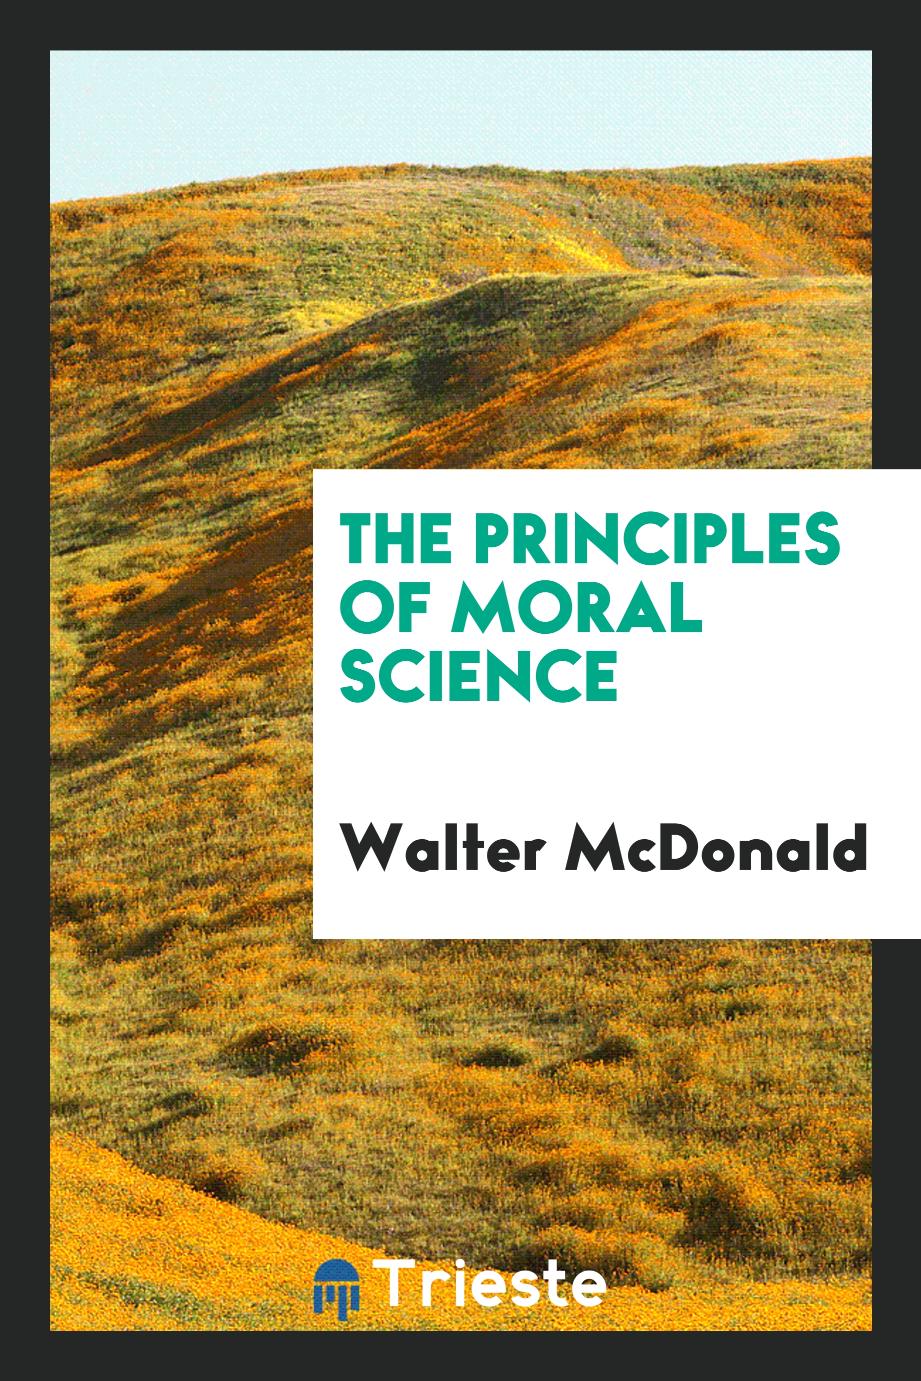 The principles of moral science